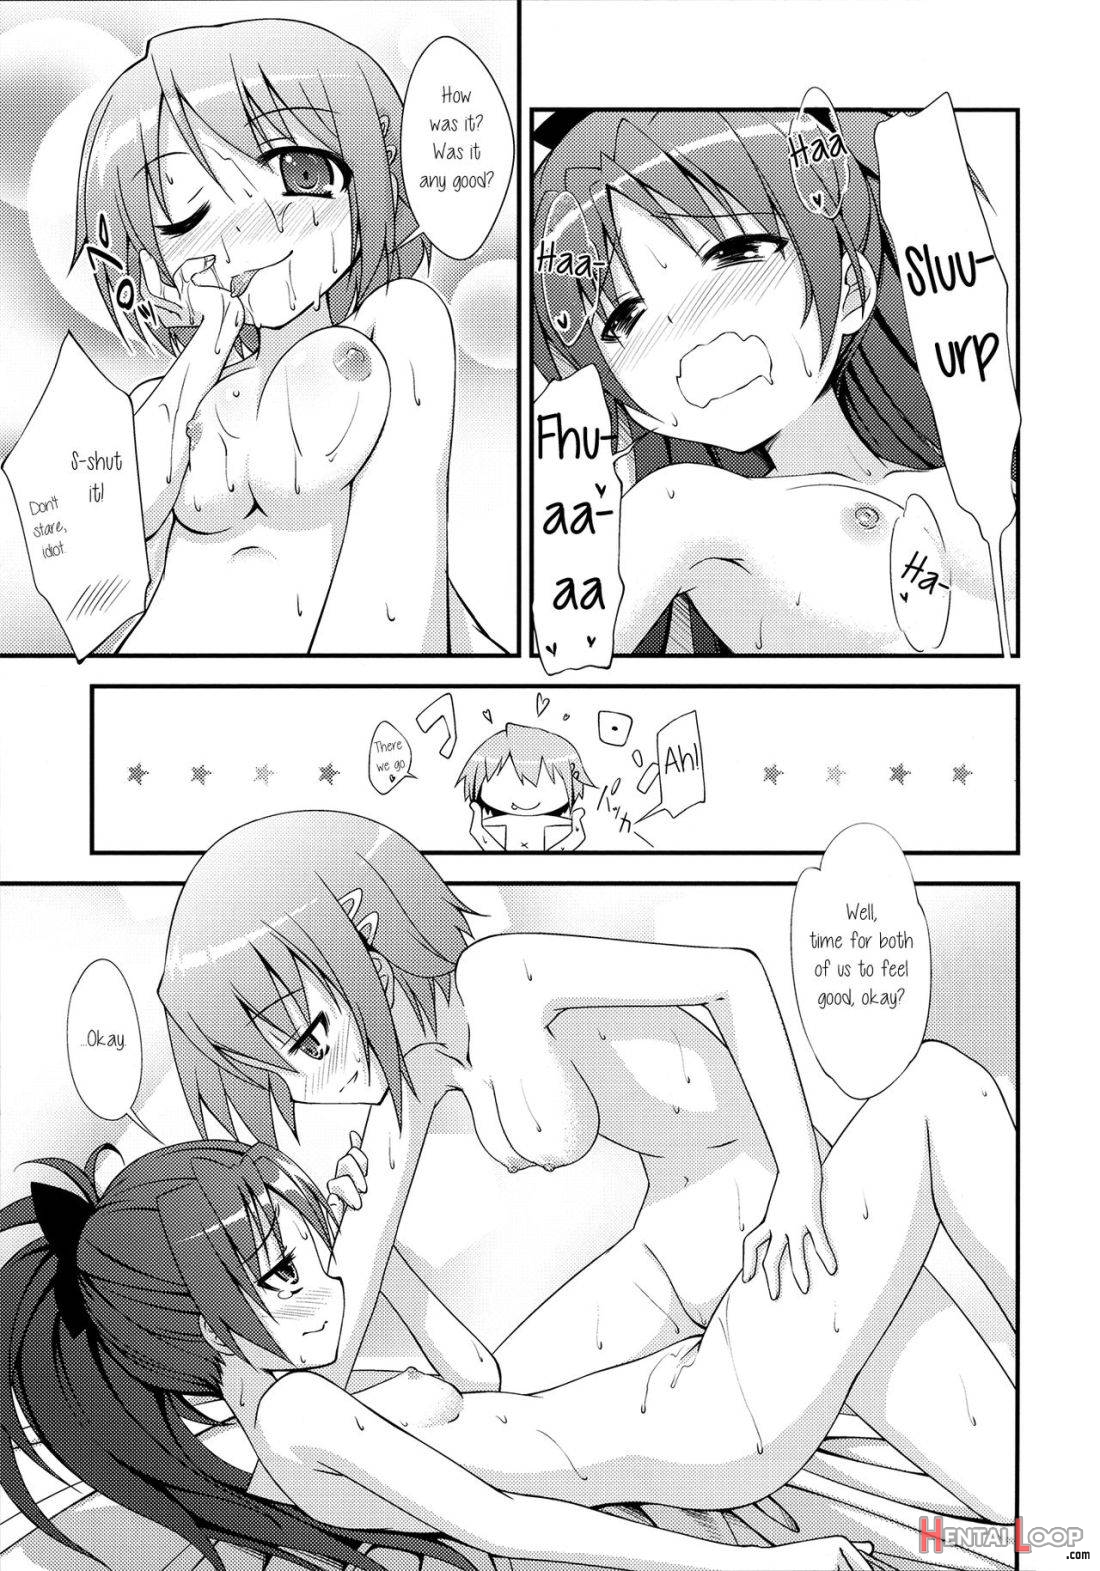 Lovely Girls’ Lily Vol.1 page 10